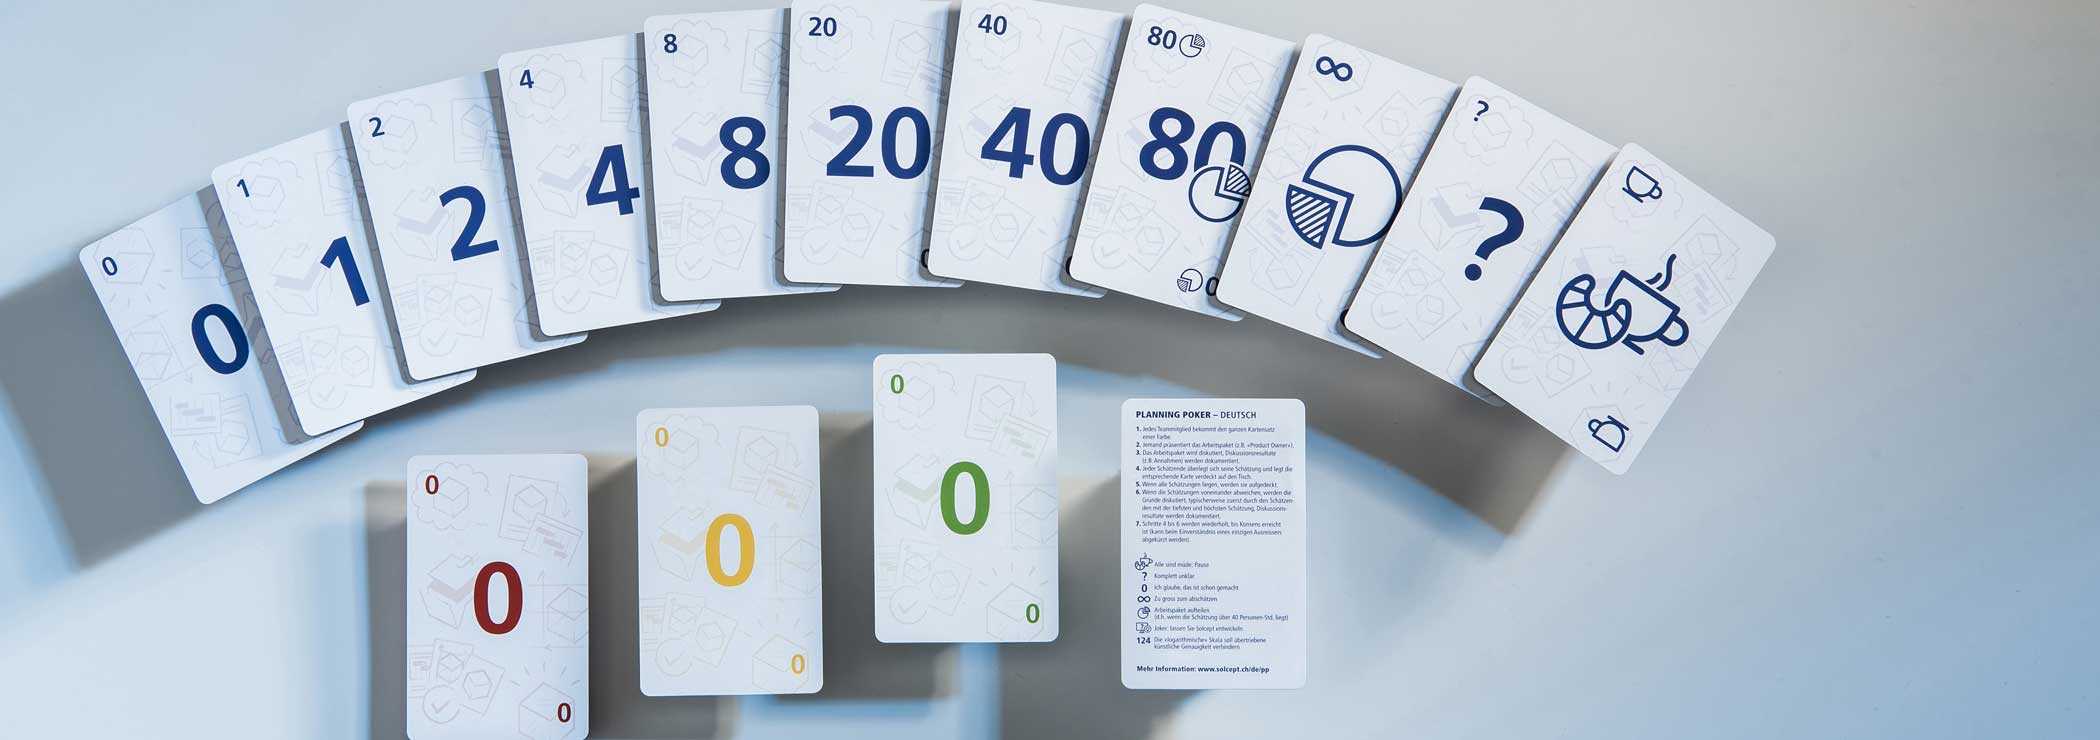 Instructions For Planning Poker For Planning Poker Cards Template